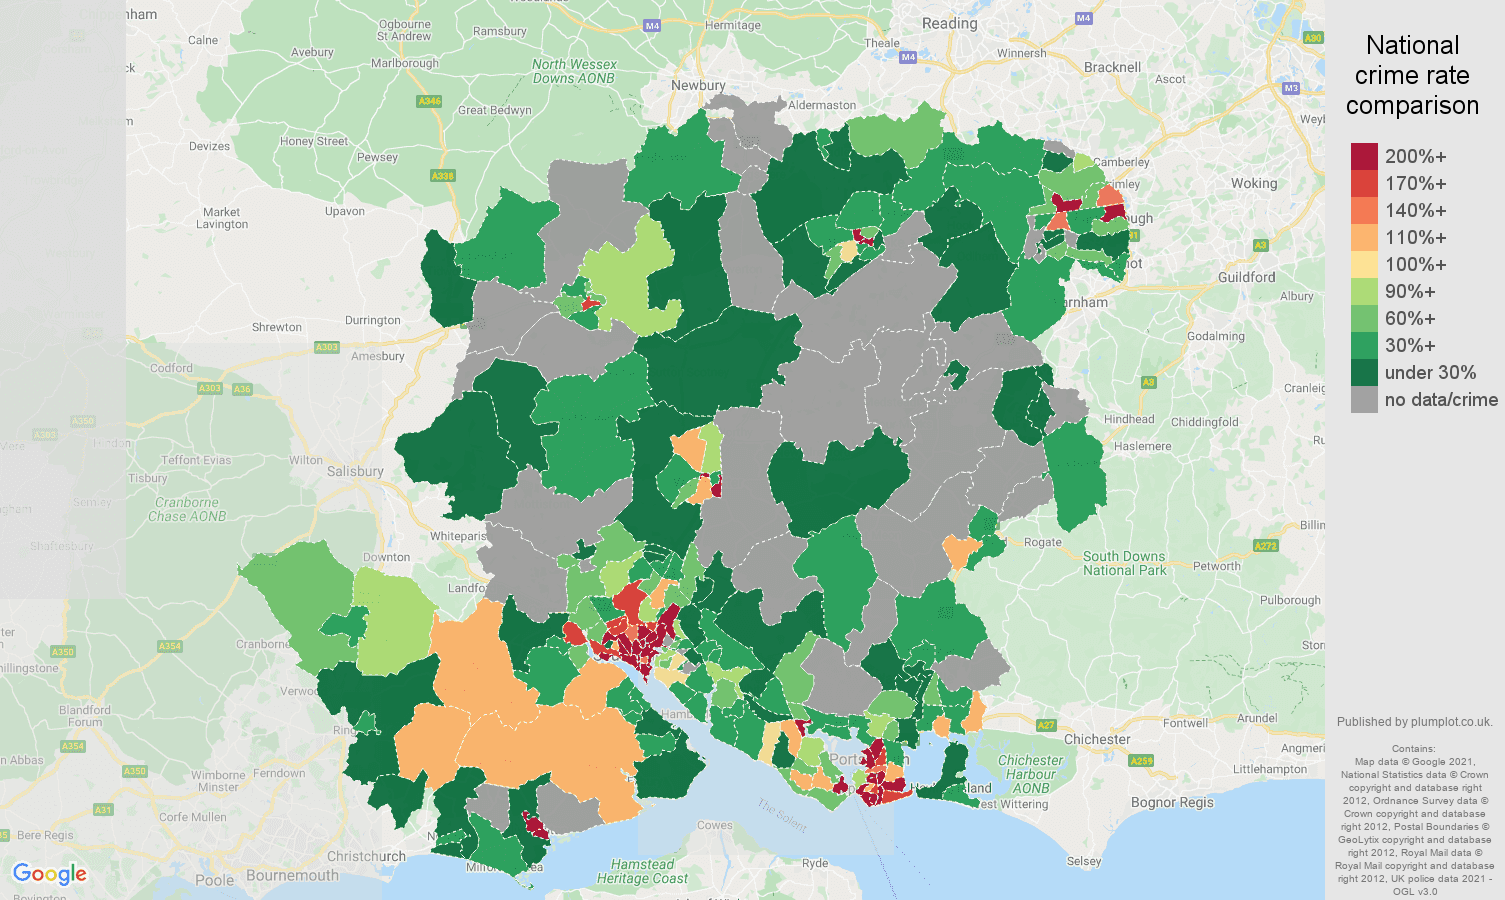 Hampshire bicycle theft crime rate comparison map